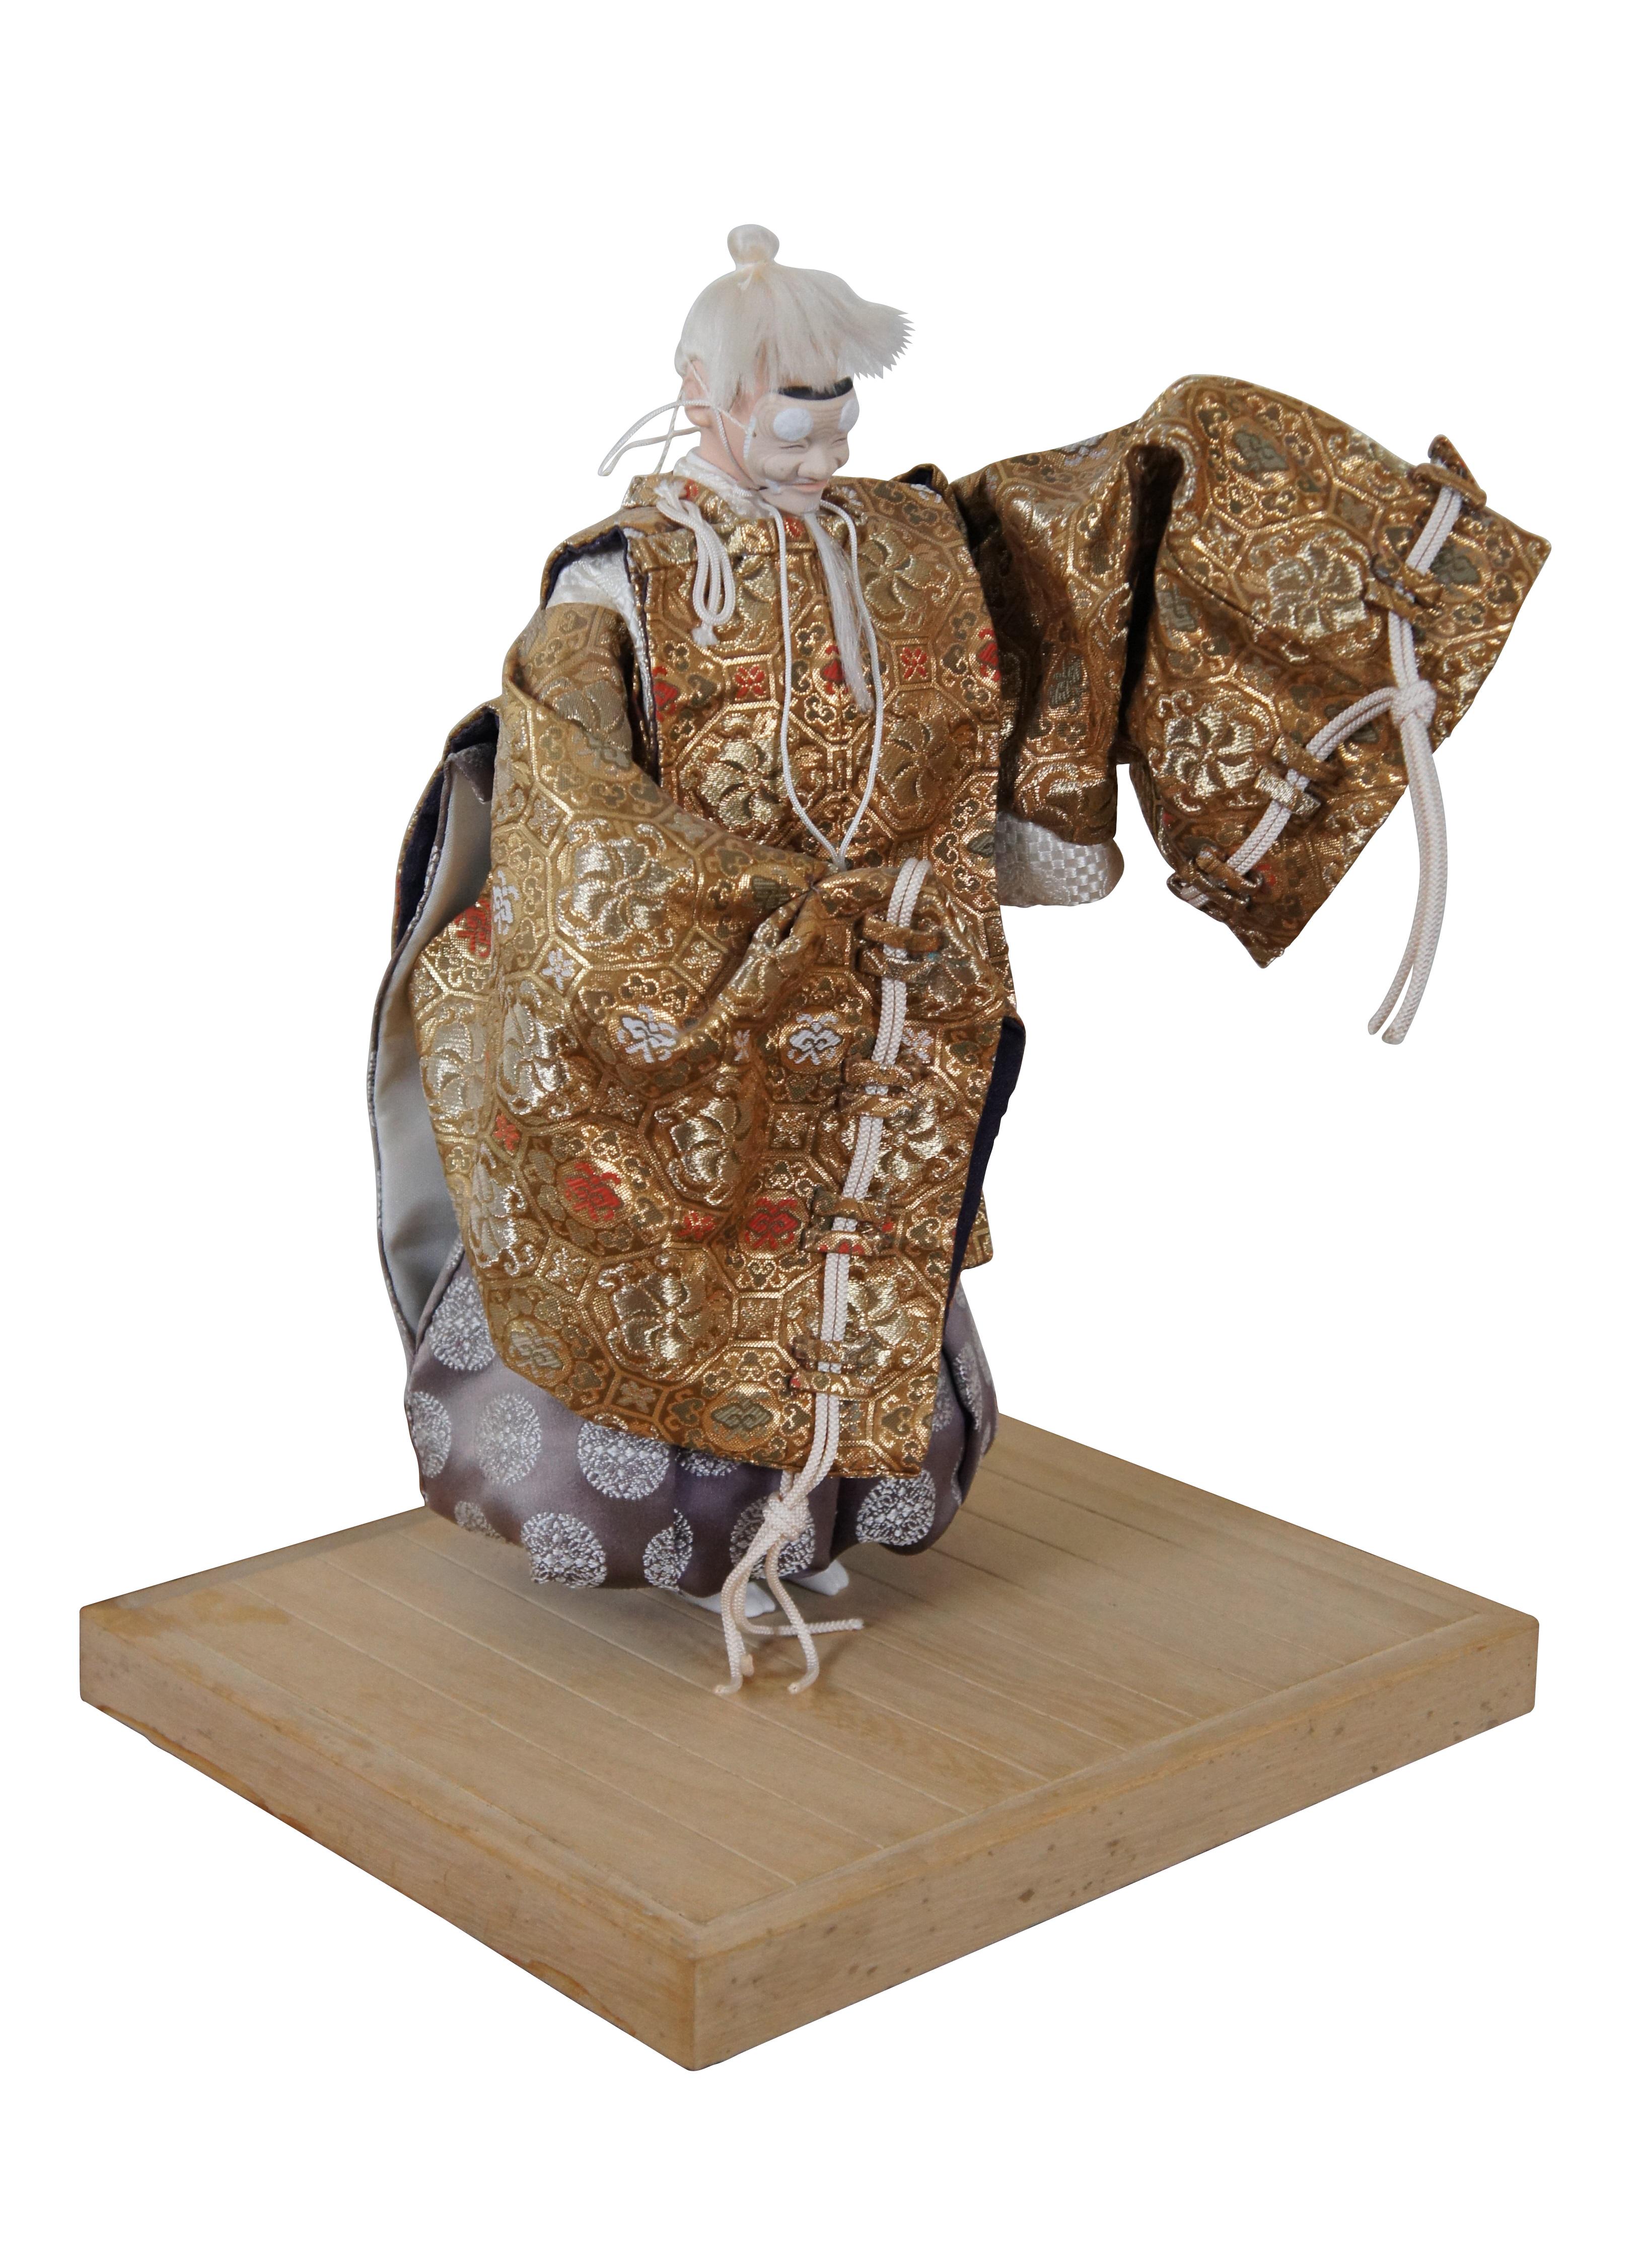 Vintage decorative doll / figurine depicting an old man / diety character from Japanese Noh Theatre. The mask appears to be a Hakushiki-jo / Okina style with benign expression, the suggestion of a movable jaw, long beard, and pom pom shaped